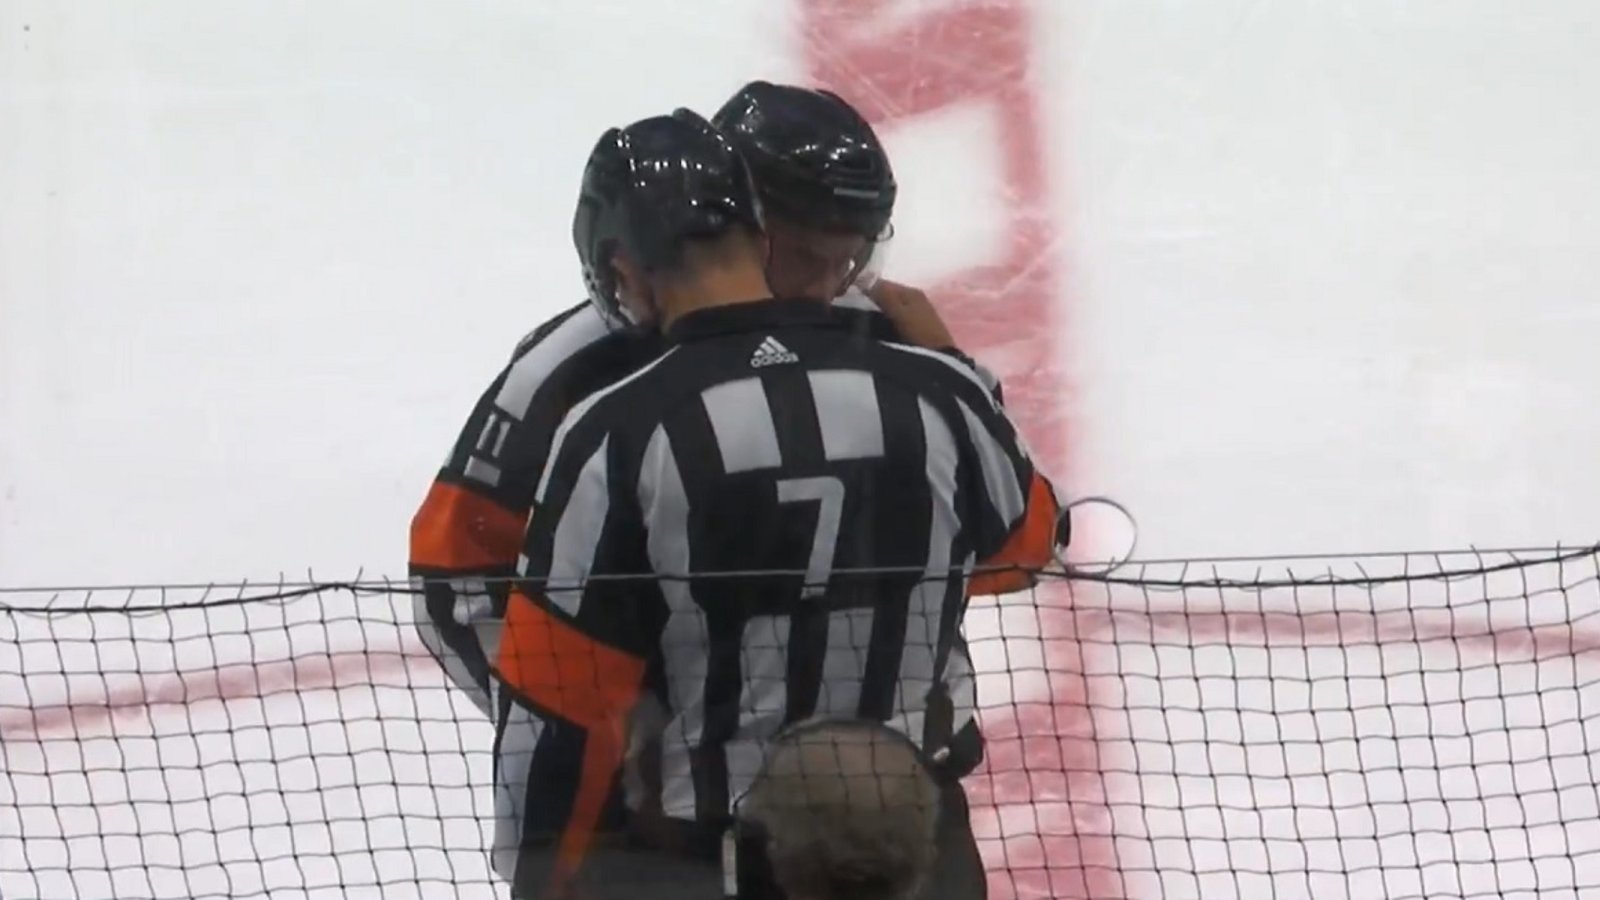 Lightning in disbelief after two questionable calls from NHL officials to end the period.